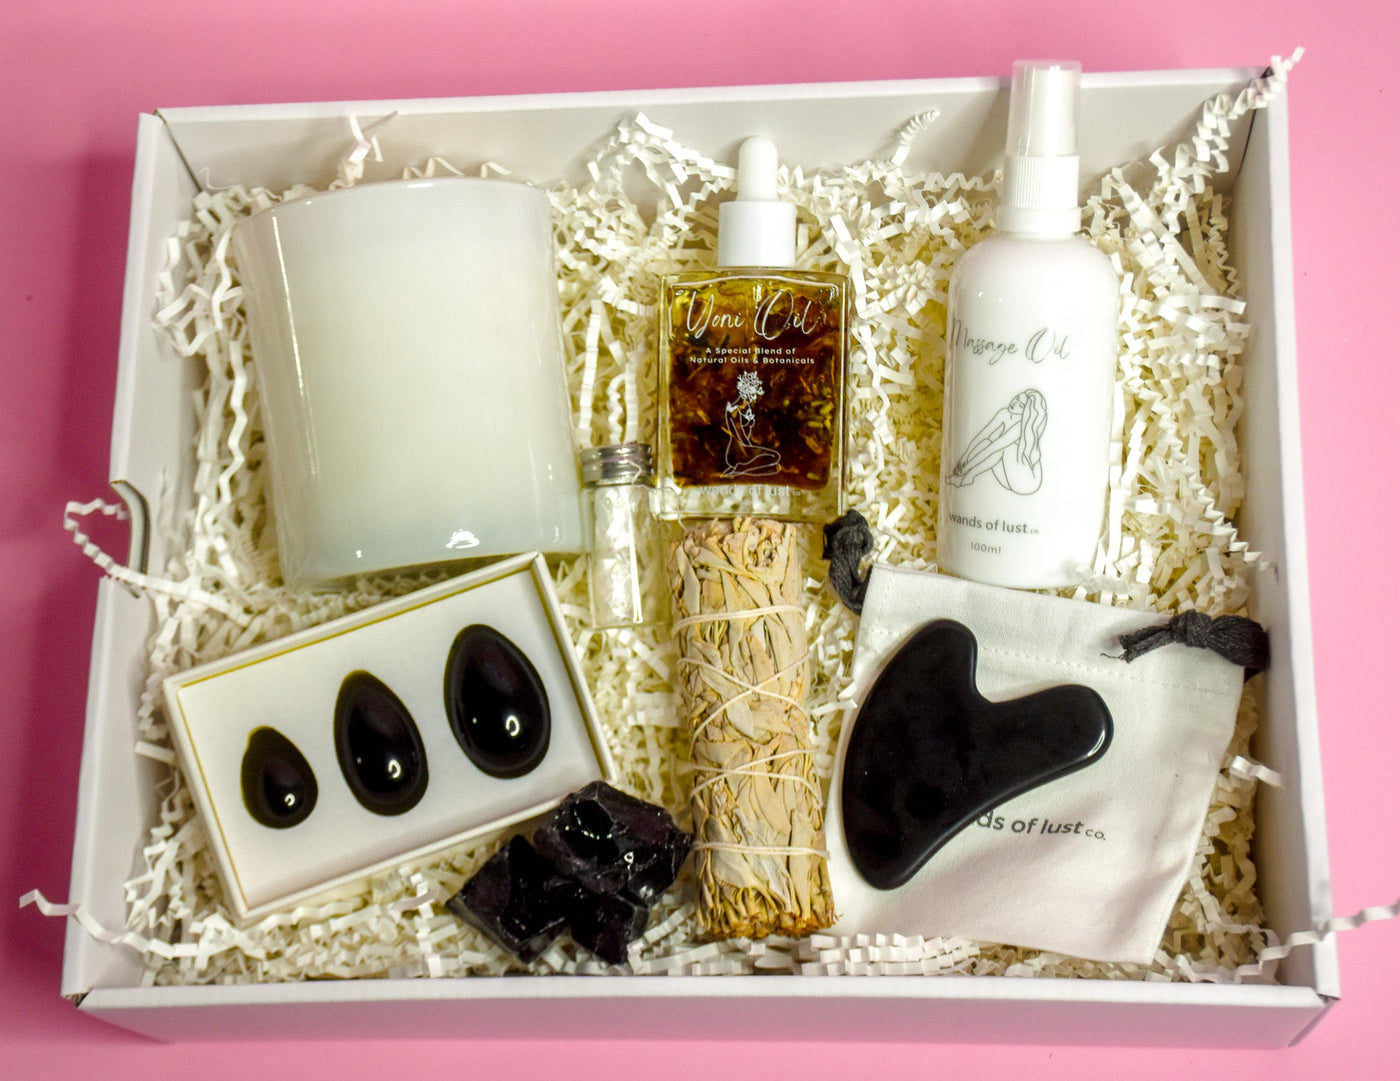 Self Care Bundle Gift box - Wands of Lust Co